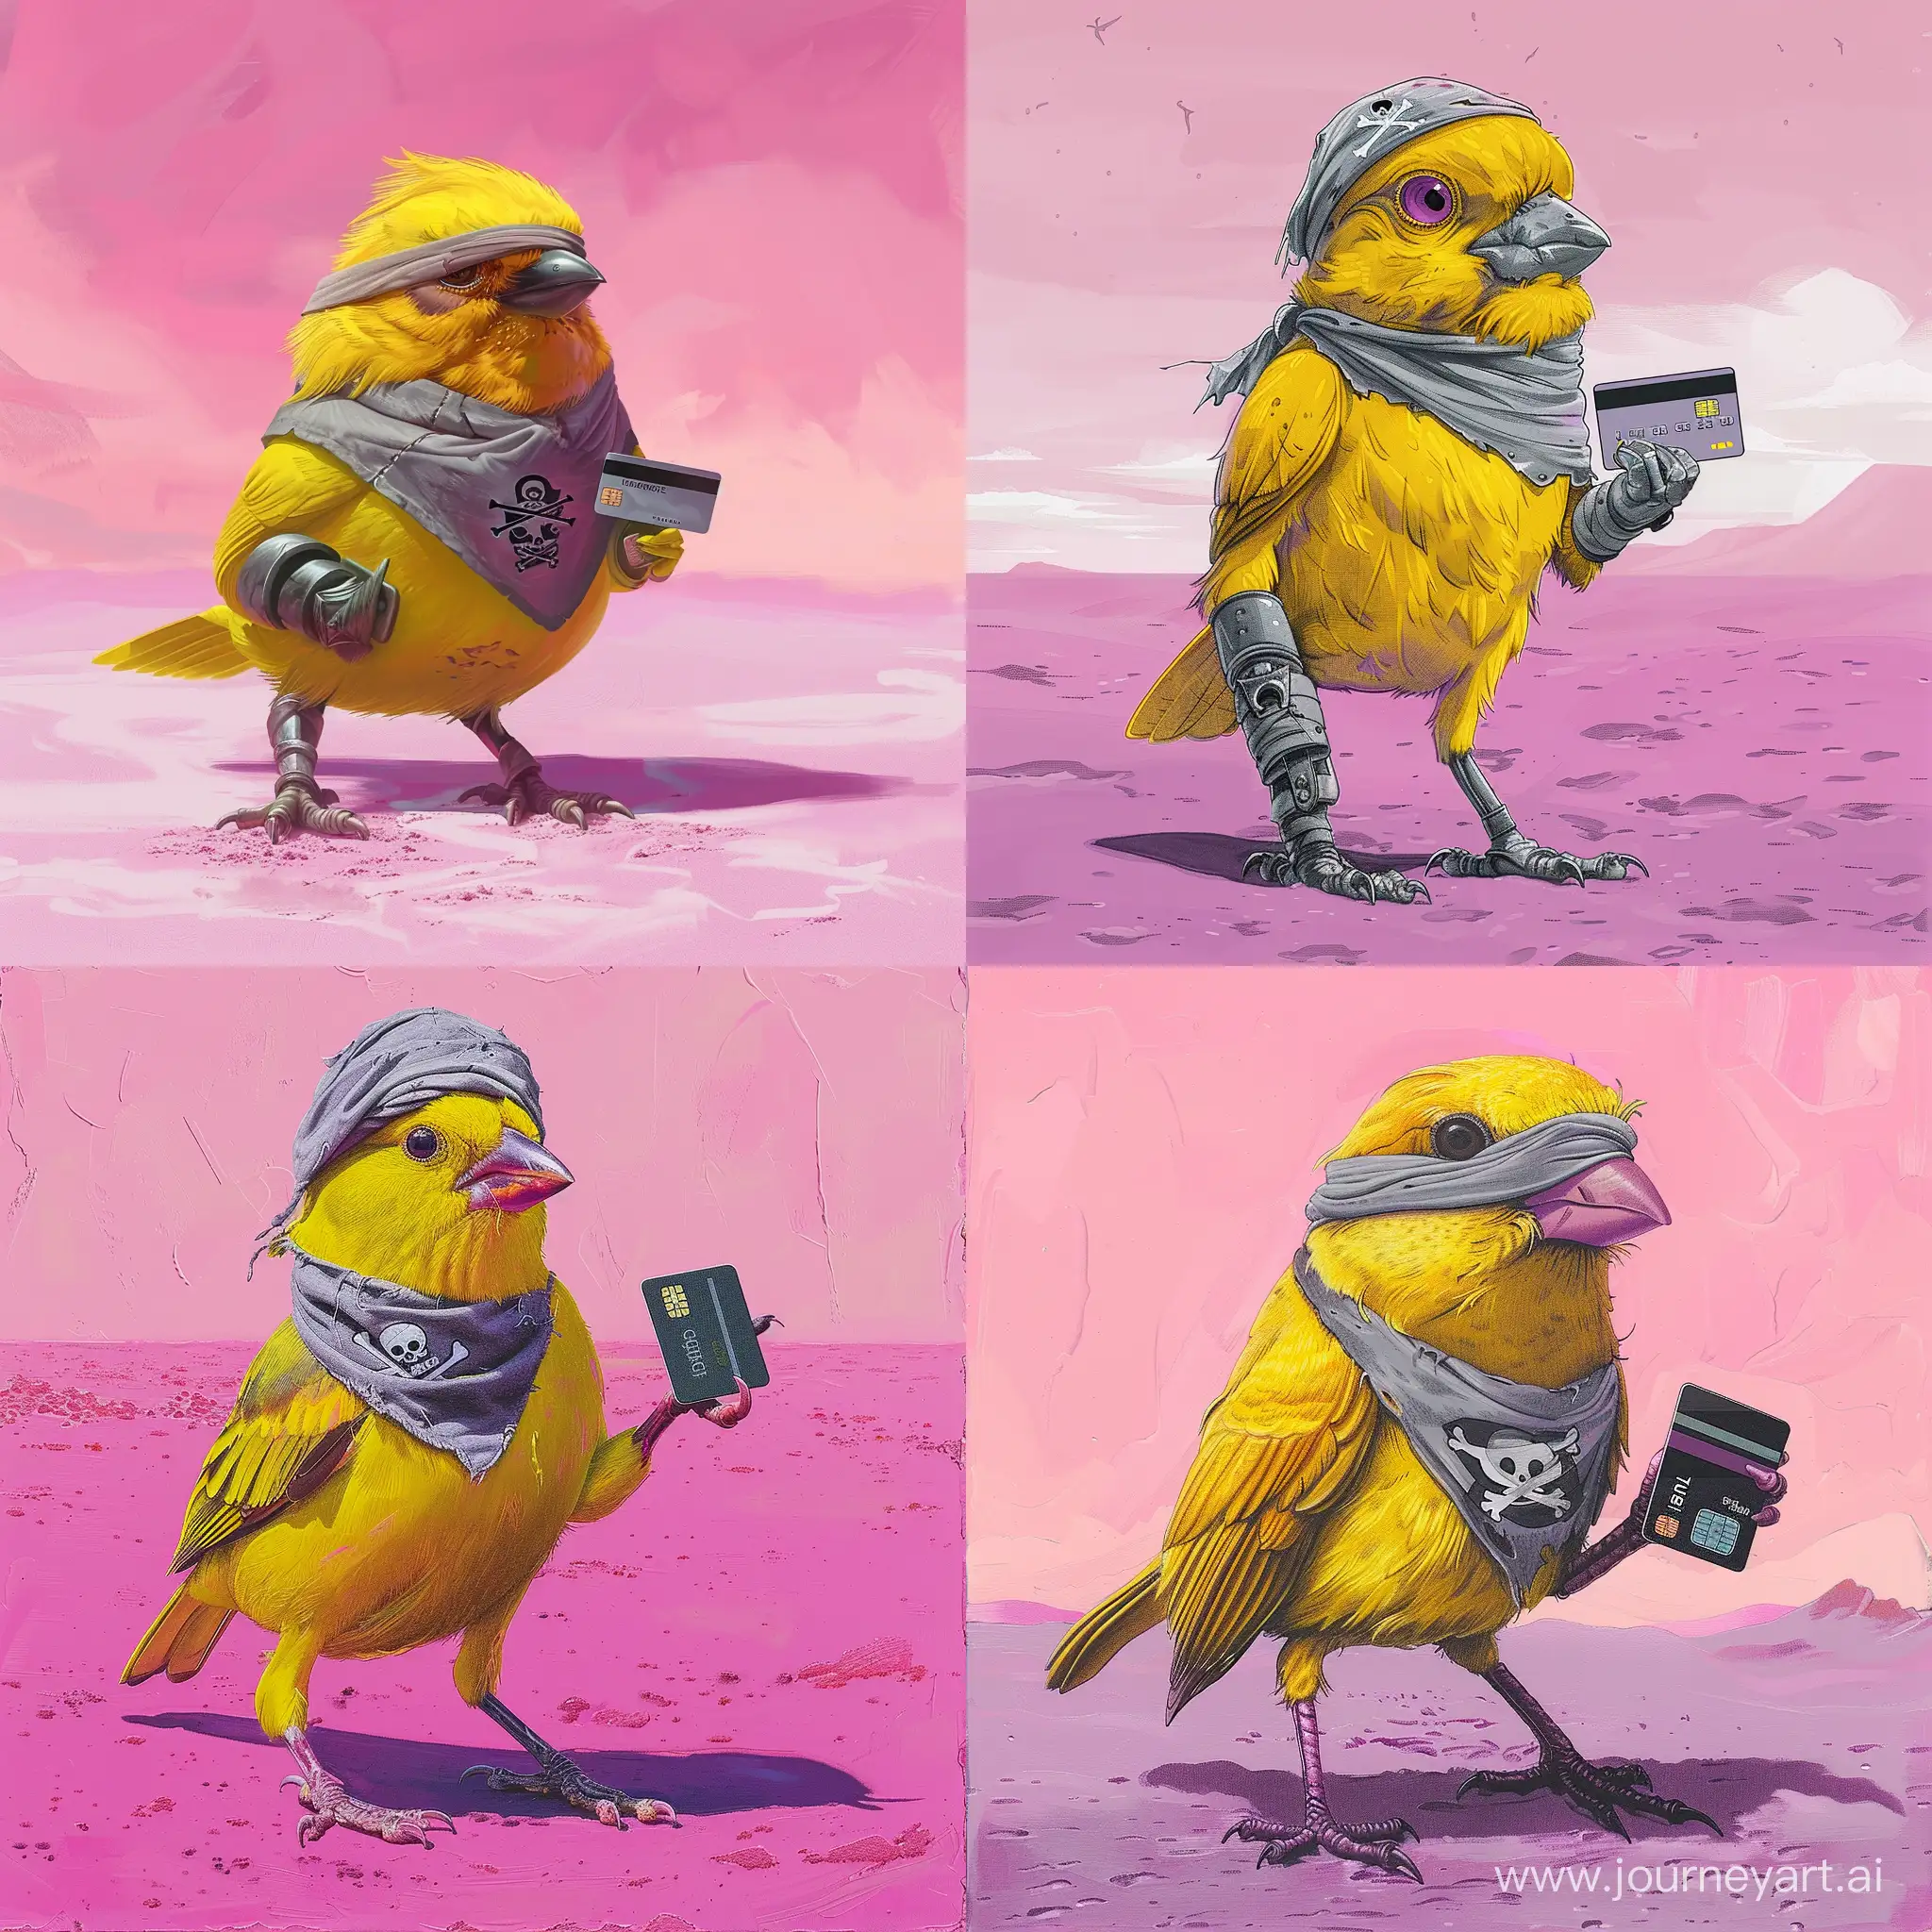 Yellow-Sparrow-Pirate-with-Iron-Legs-Holding-Credit-Card-on-Violet-Sand